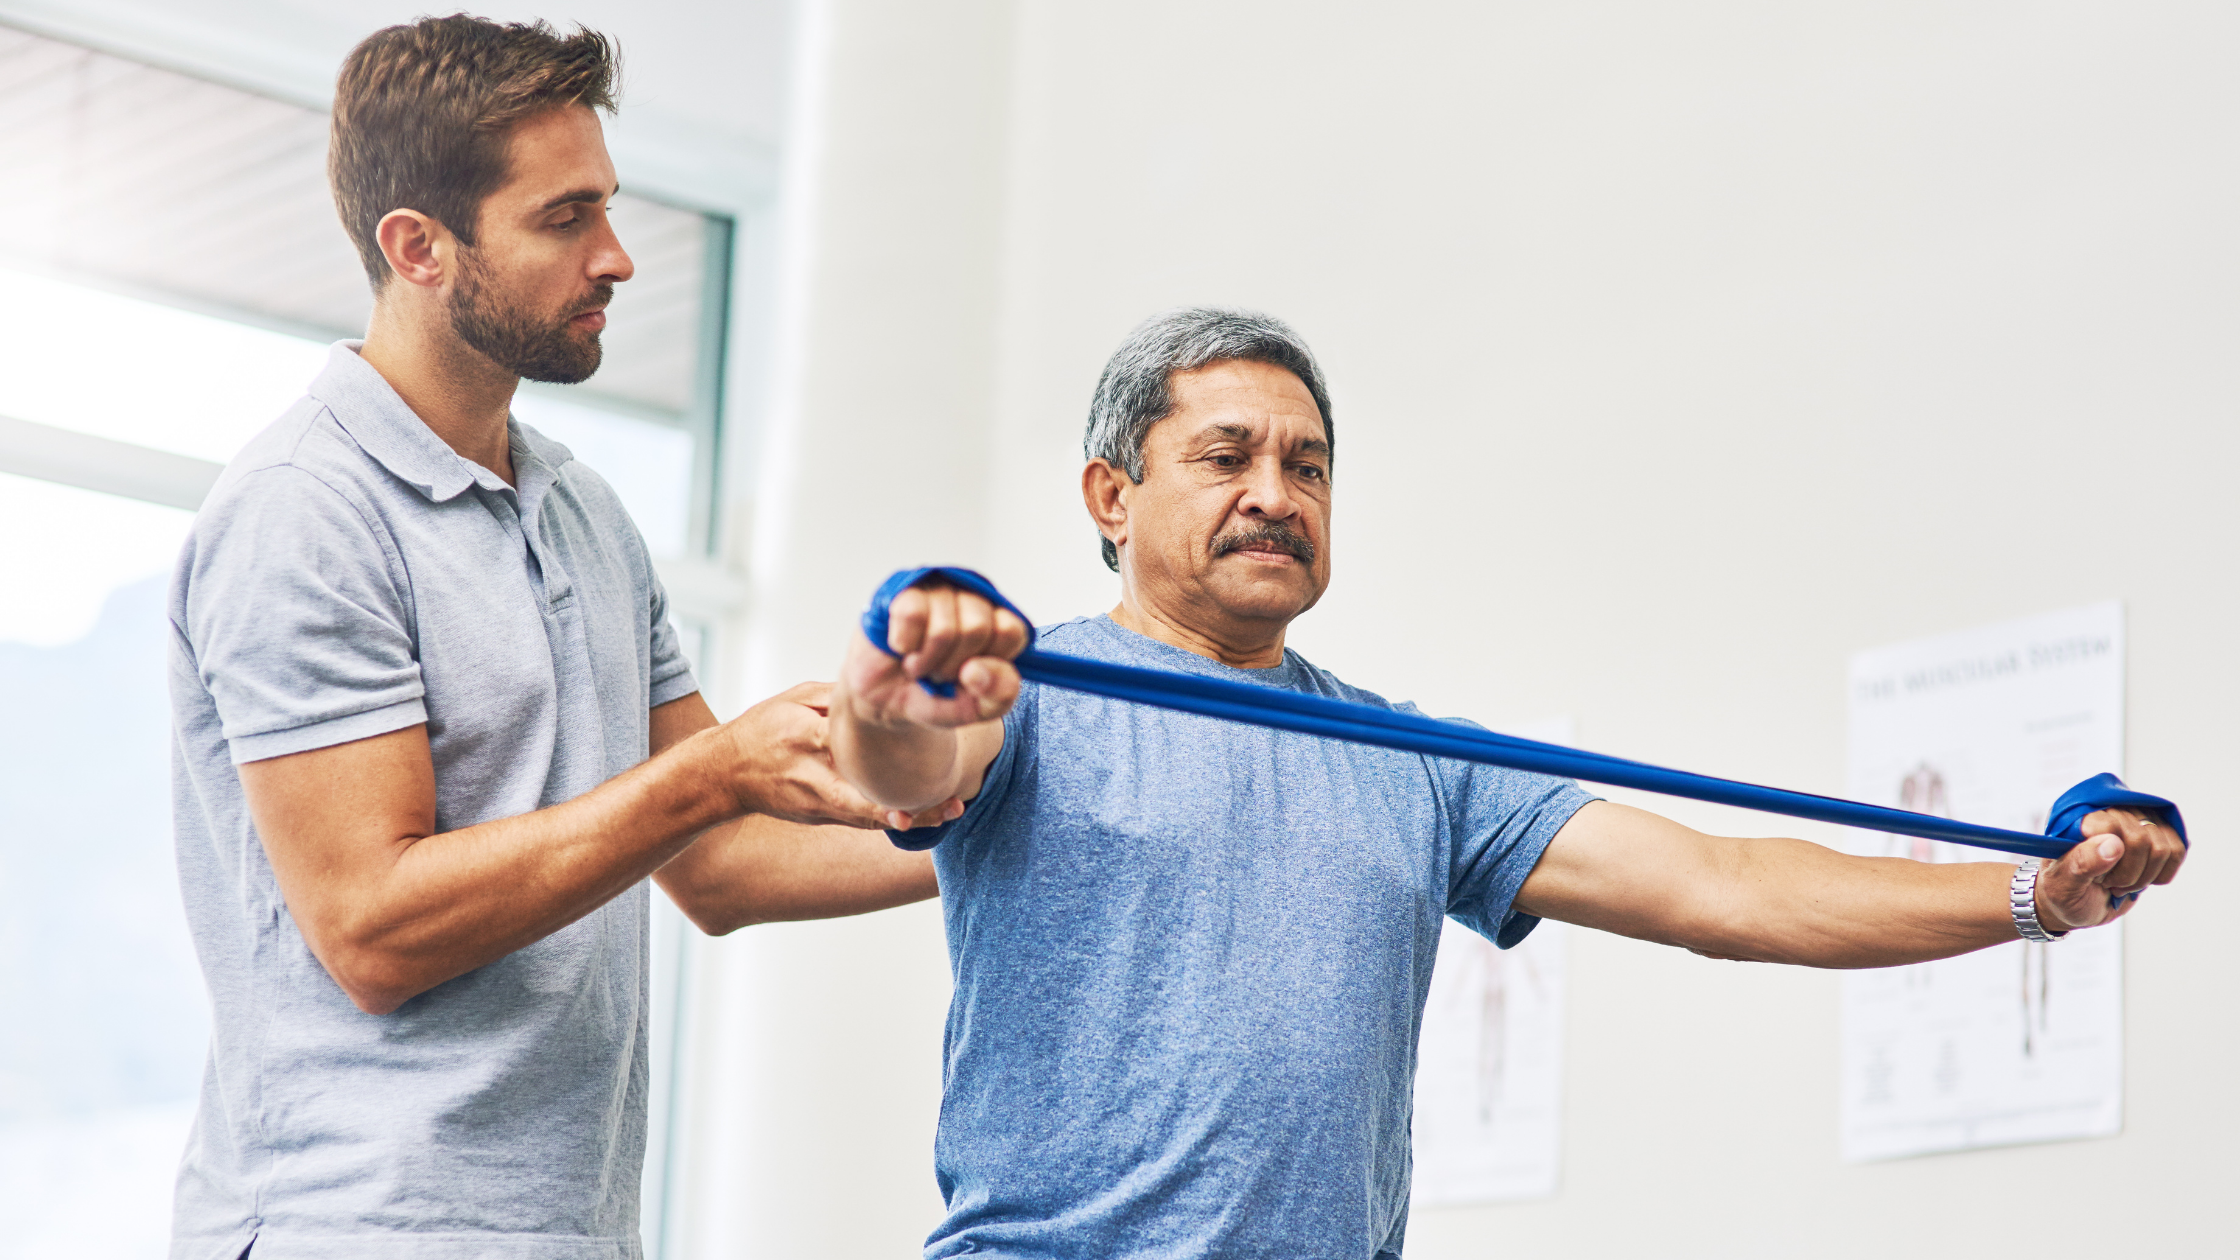 Prevention of Injuries in the Geriatric Community